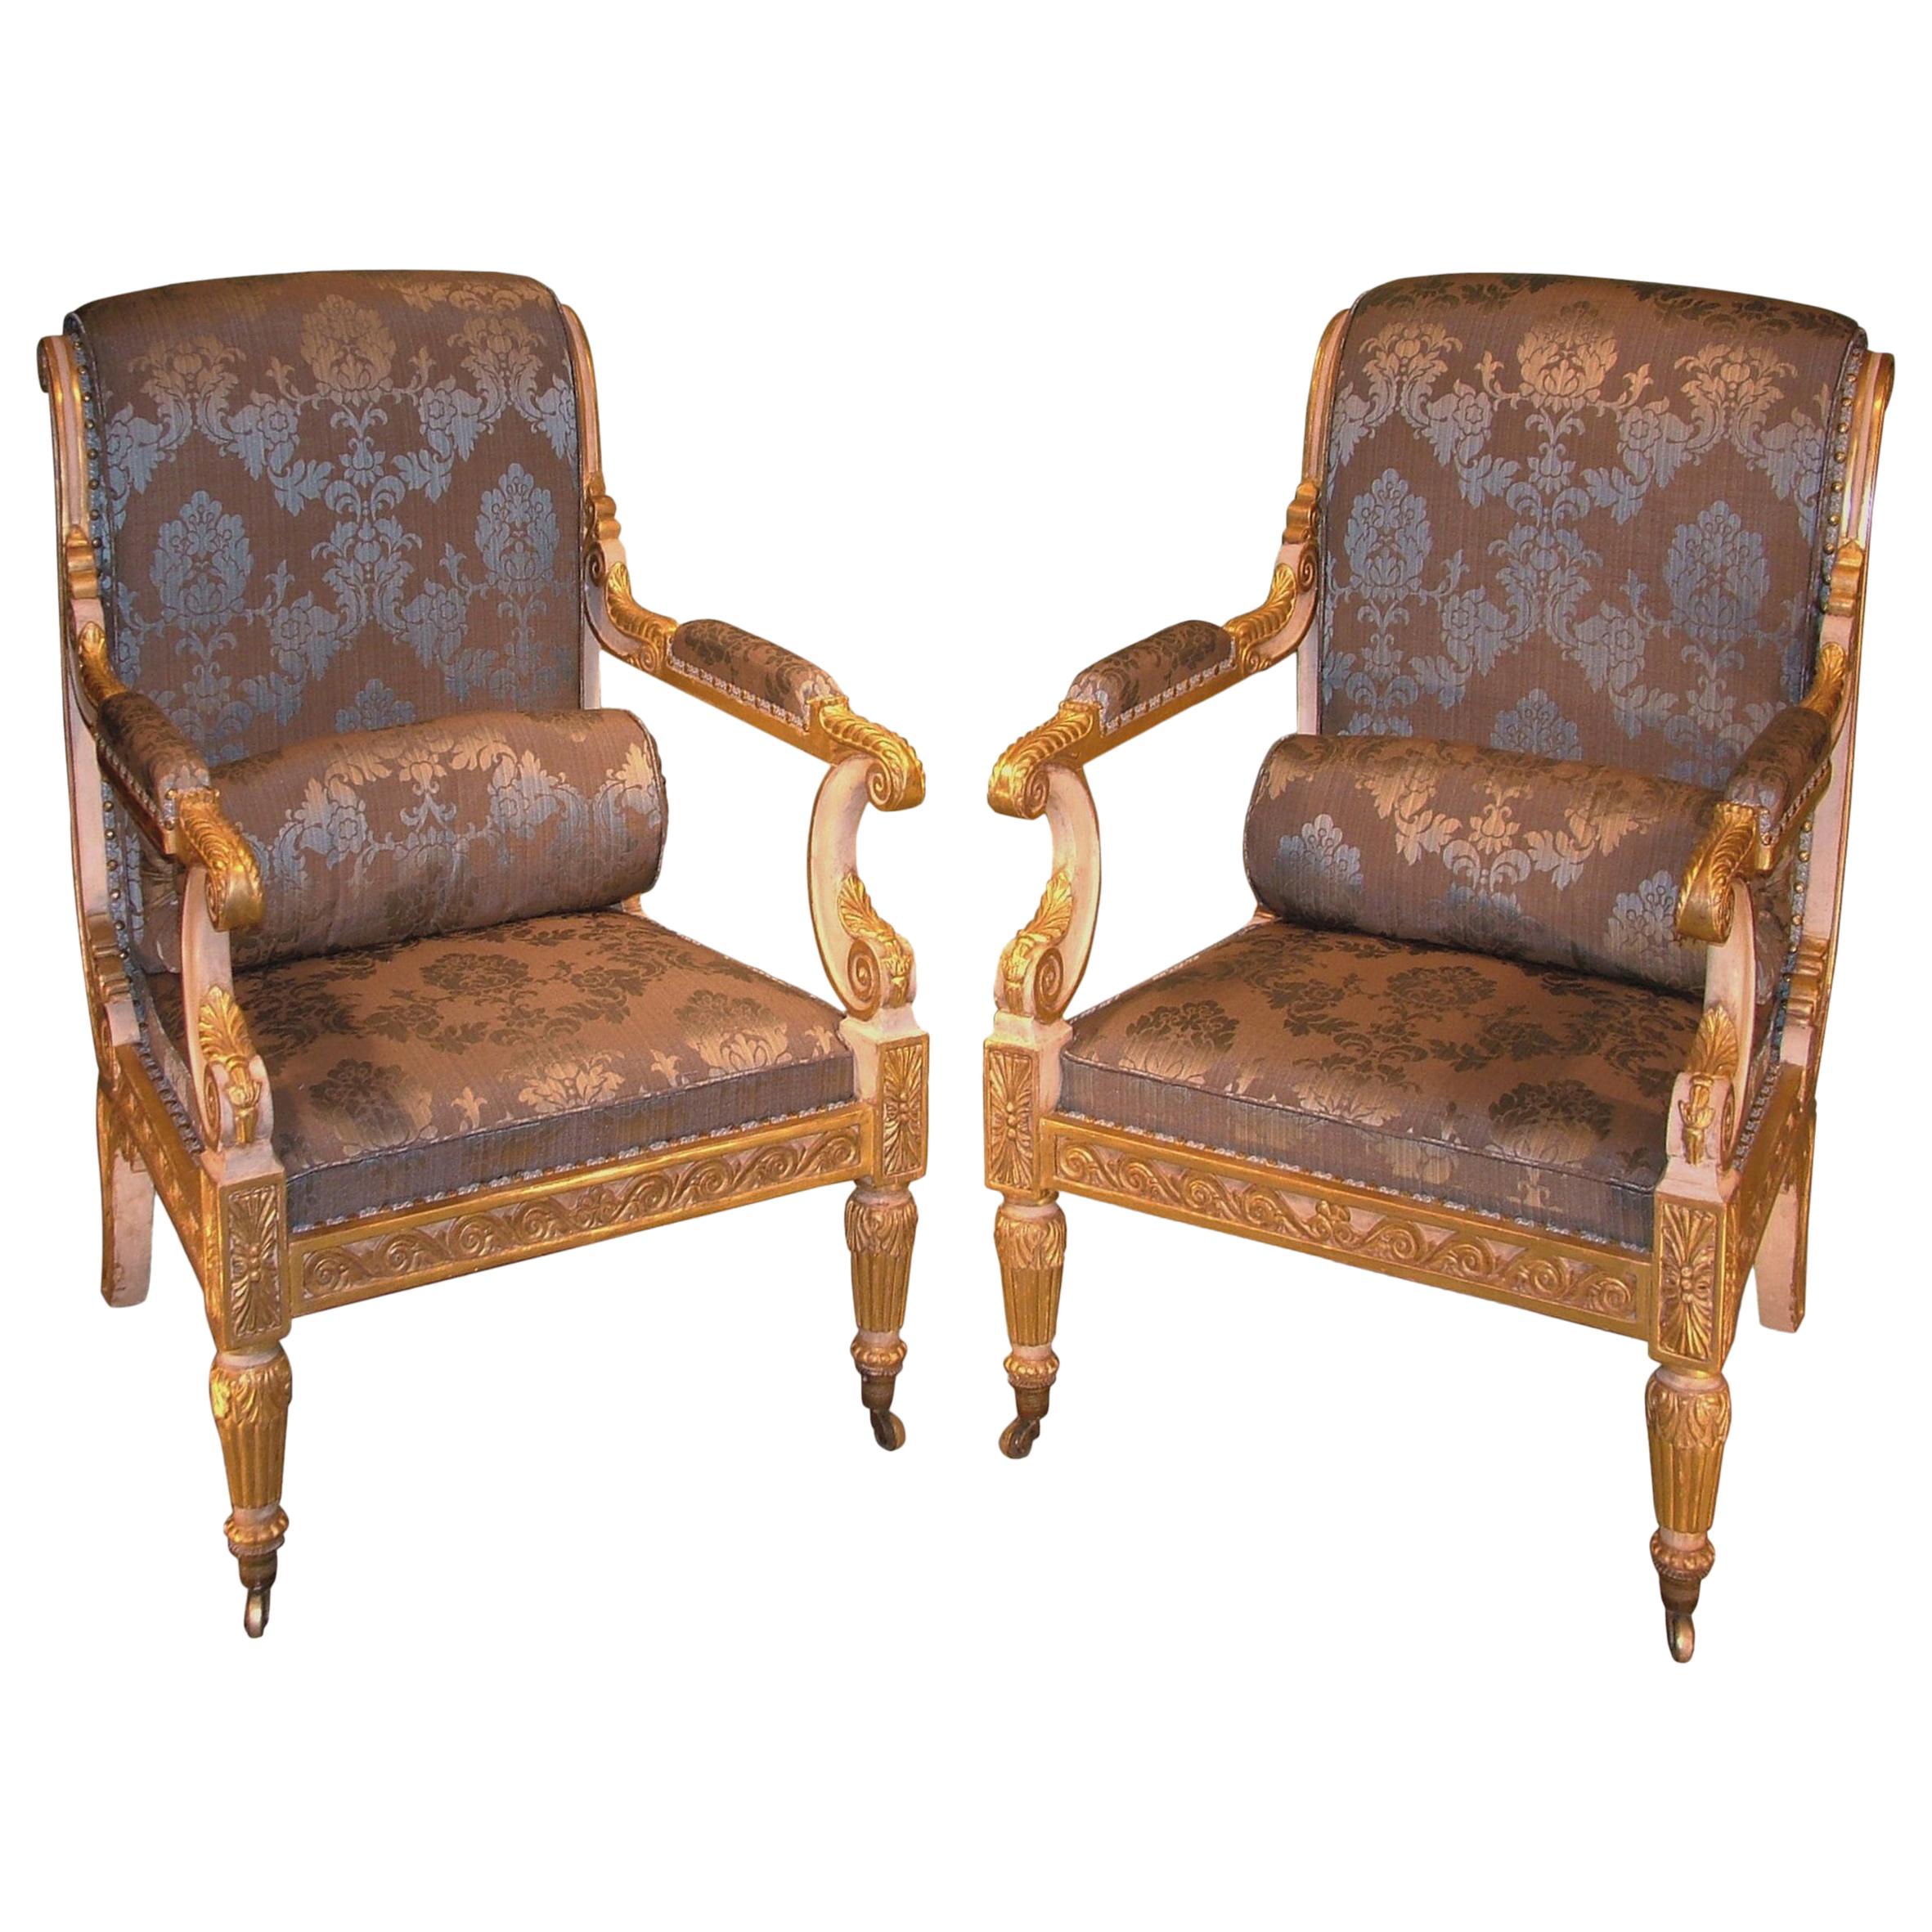 Pair of Regency Period White Painted and Giltwood Armchairs